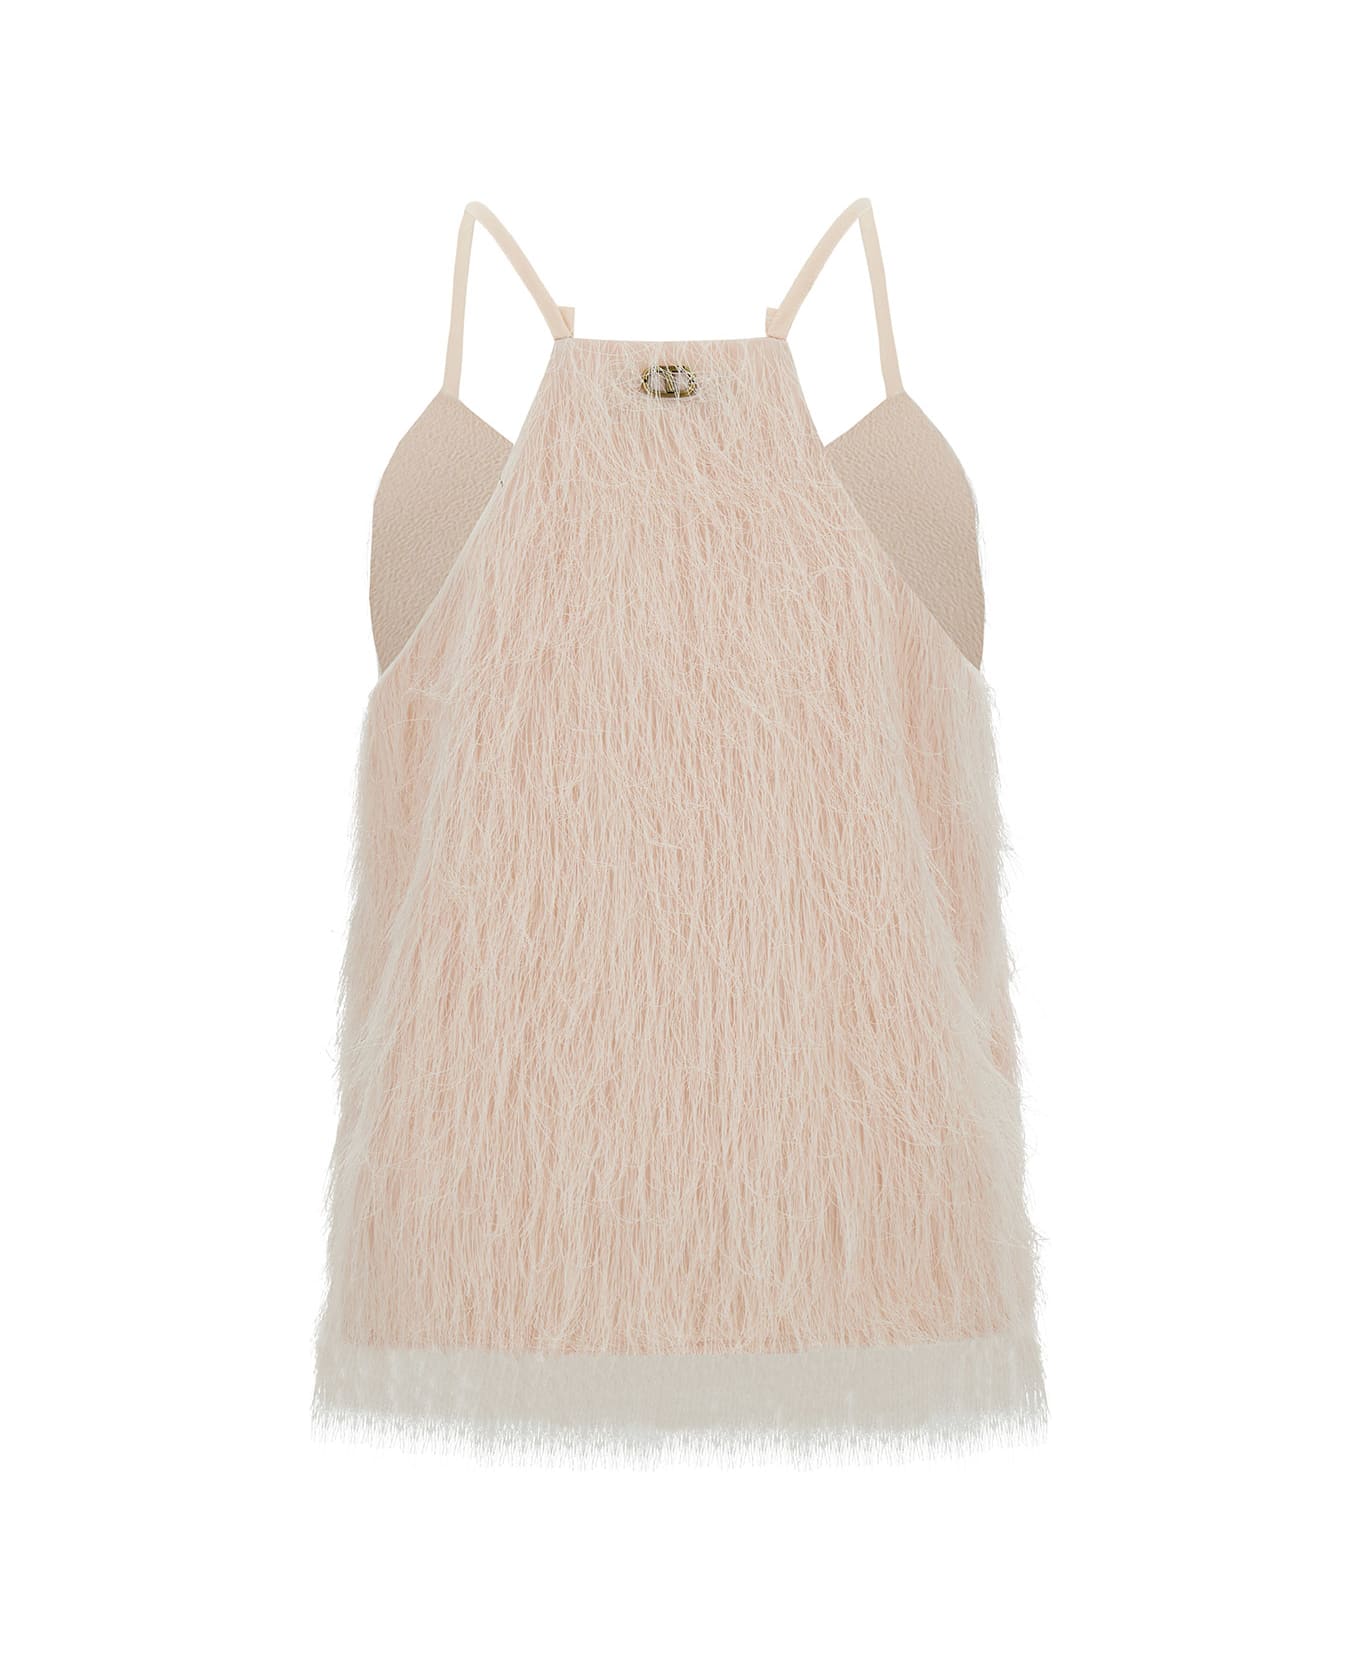 TwinSet Light Pink Top With All-over Feathers In Tech Fabric Woman - LIGHT PINK キャミソール